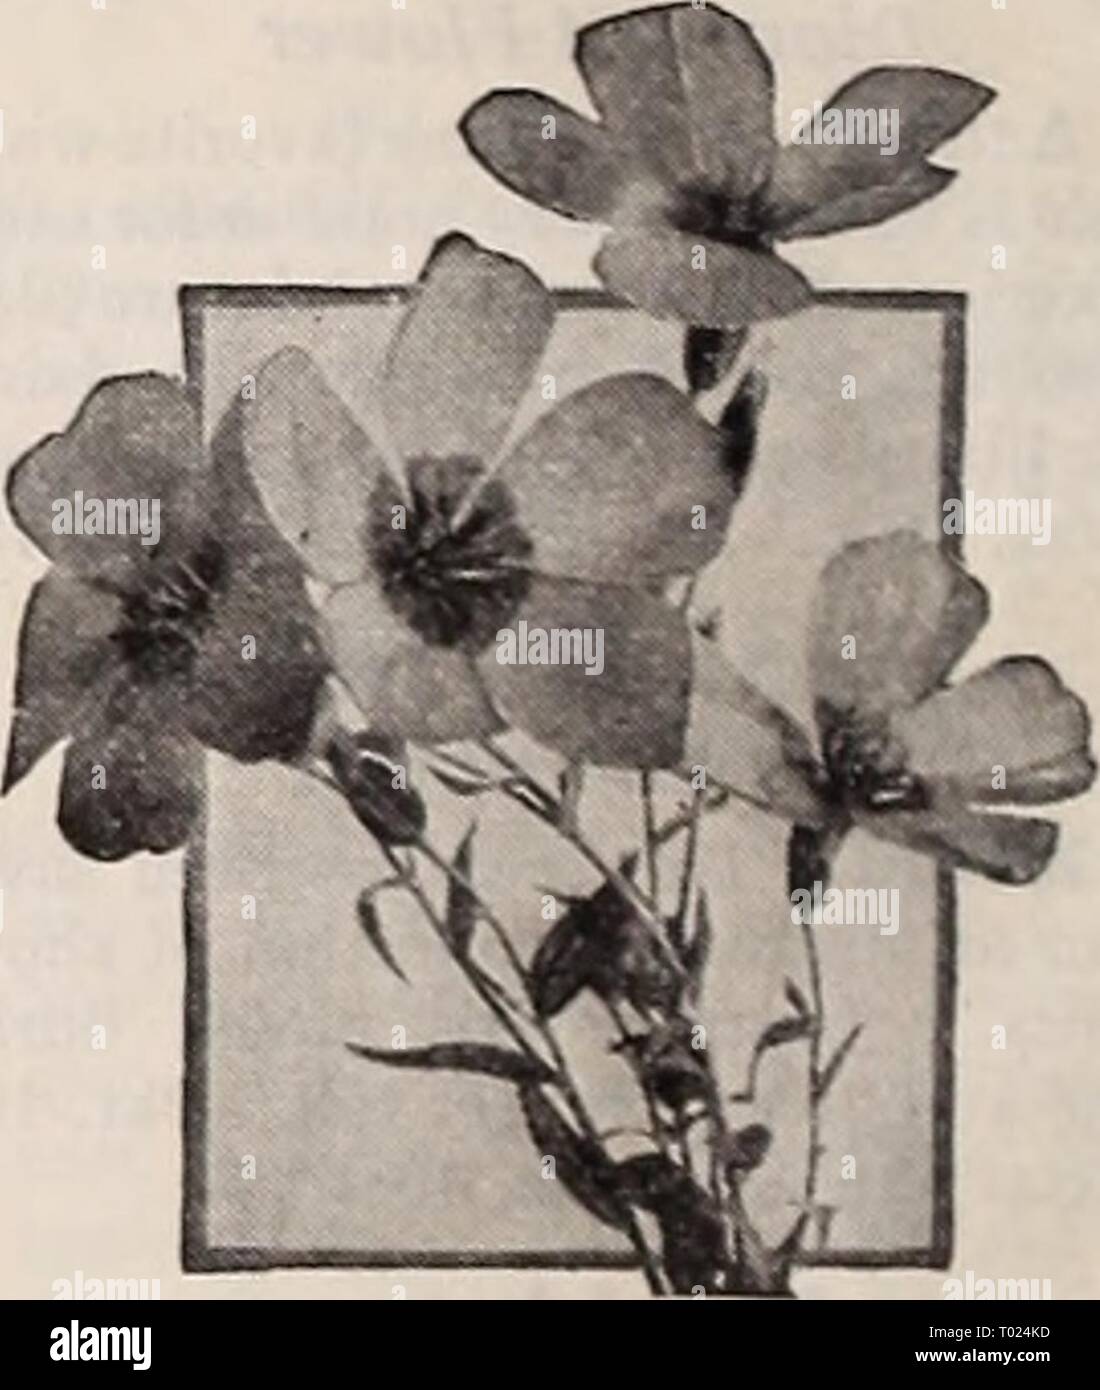 Dreer's garden book for 1940 . dreersgardenbook1940henr Year: 1940  Lathyrus latifolius Lathyrus iH ® § Hardy Sweet Pea A showy, free-flowering, hardy climber for covering old stumps, fences, etc. Blooms continuously from midsummer until frost. 5-6 feet. 2751 Latifolius, Pink Beauty. Fine rose-pink flower clusters. 2753 — Red (Splendens). Always ad- mired for its rich color. 2755 - White Pearl. Beautiful, large, pure white flowers. Any of the above: Pkt. 10c; special pkt. 25c; | oz. 40c. 2756 Mixed Colors. This includes all colors available. Pkt. 10c; i oz. 25c; oz. 75c. Lavaiera ® ® Annual Ma Stock Photo